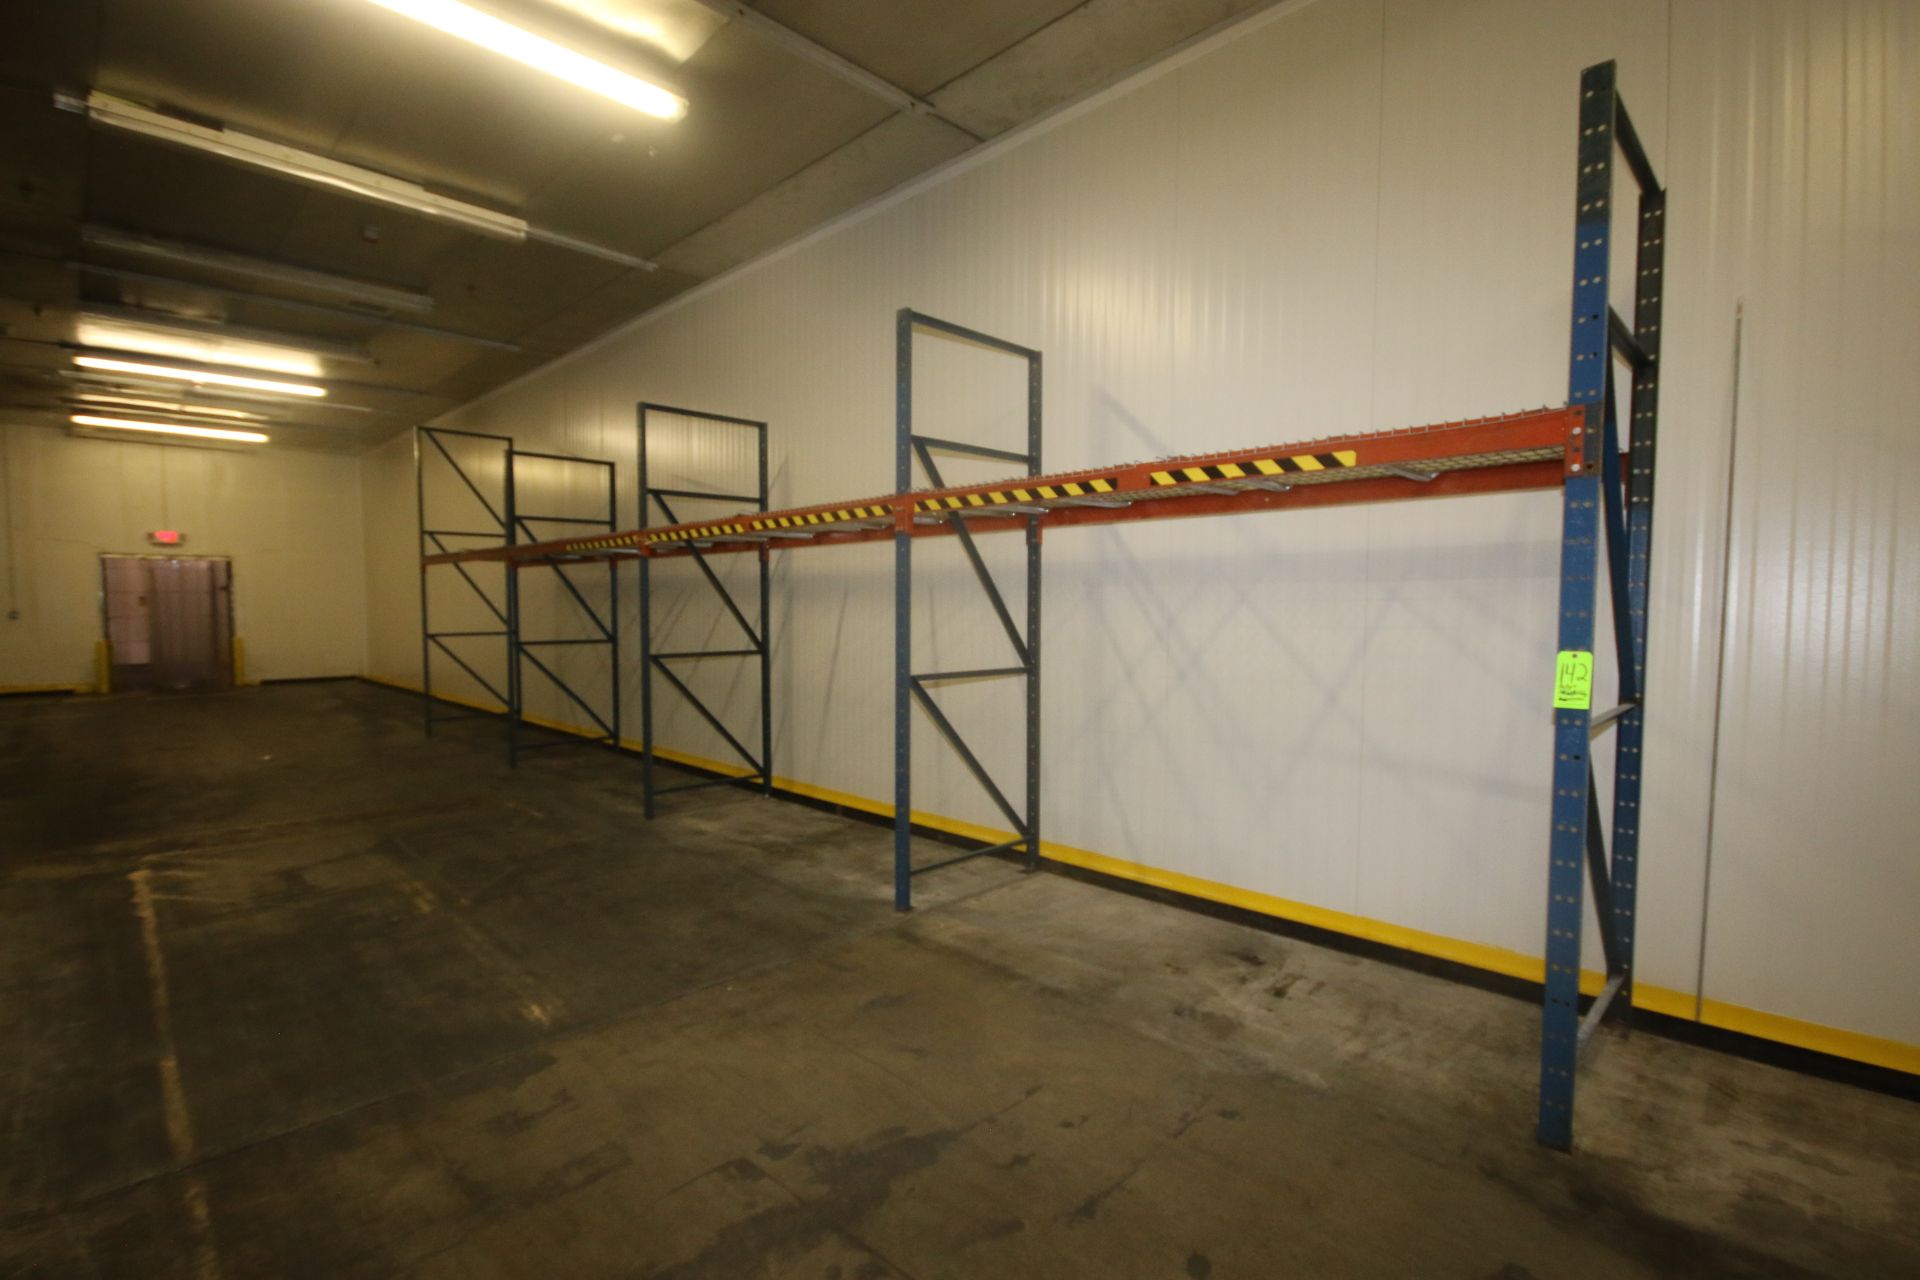 4-Sections of Pallet Racking, Includes (5) Aprox. 120" H Uprights with (4) Sets of Cross Beams,